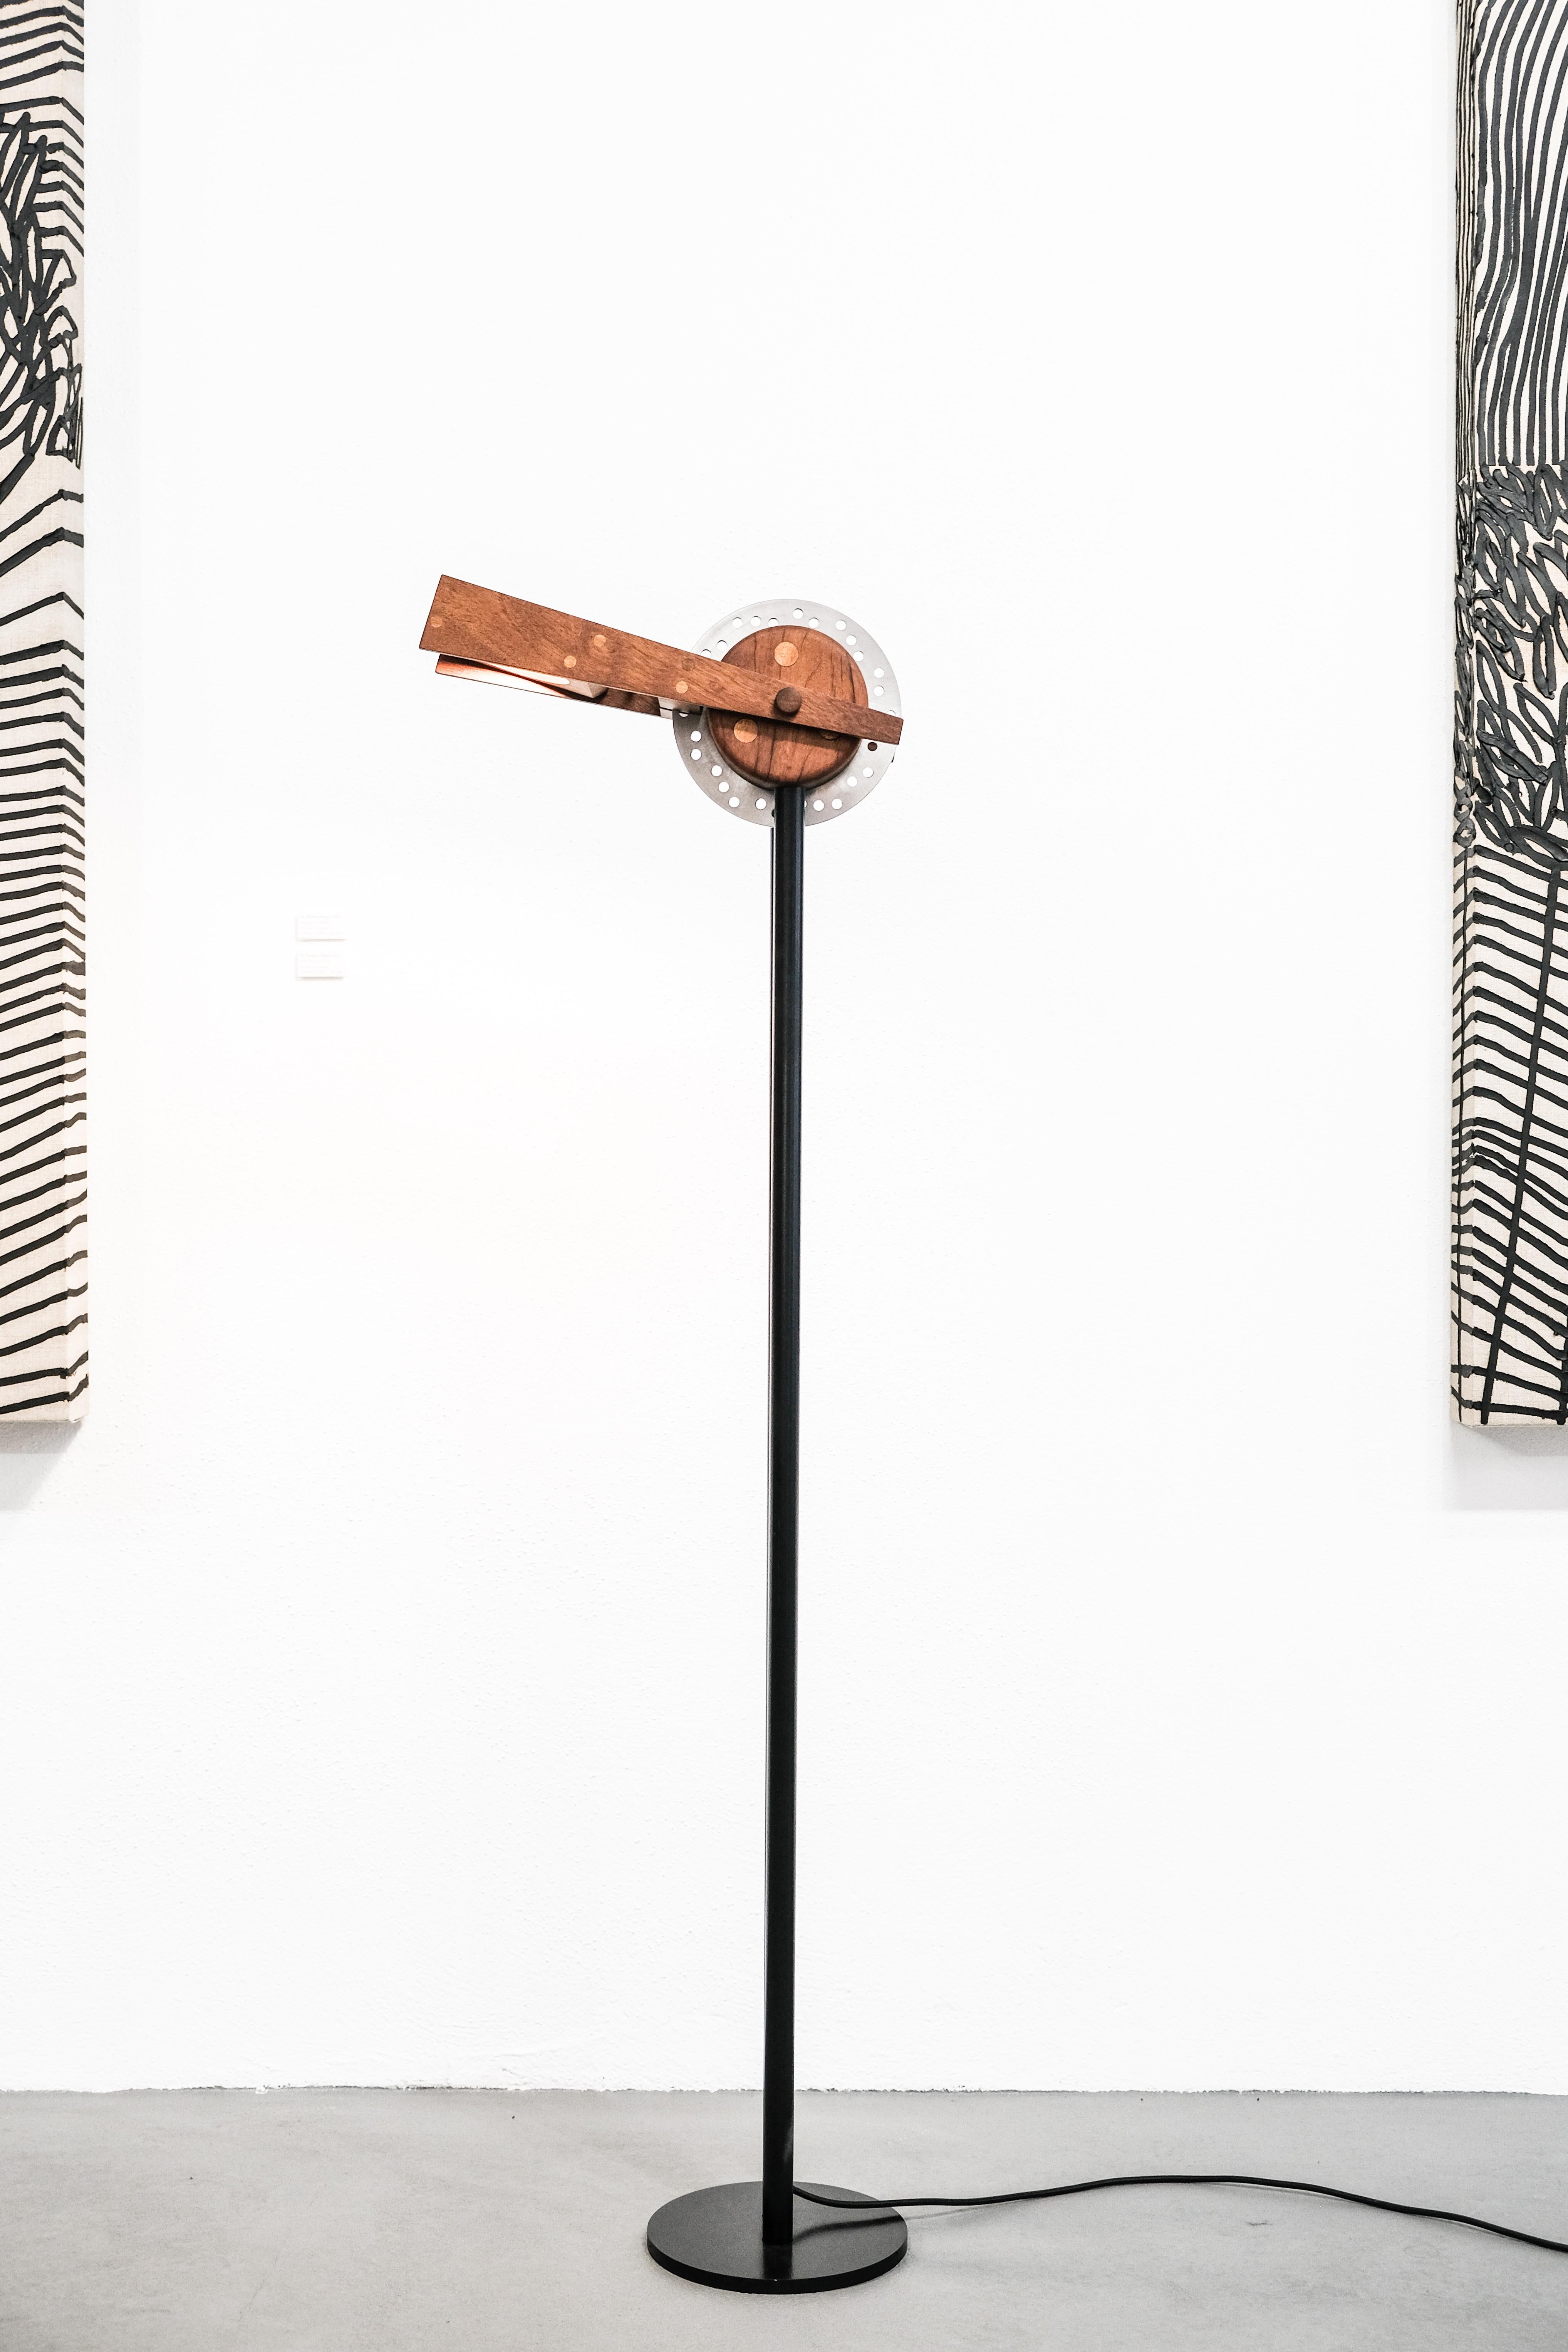 Freno floor lamp by Caio Superchi
Dimensions: D 40 x W 22 x H 160 cm 
Materials: Steel, Wood, Ceramic

All our lamps can be wired according to each country. If sold to the USA it will be wired for the USA for instance.

The challenge was: How